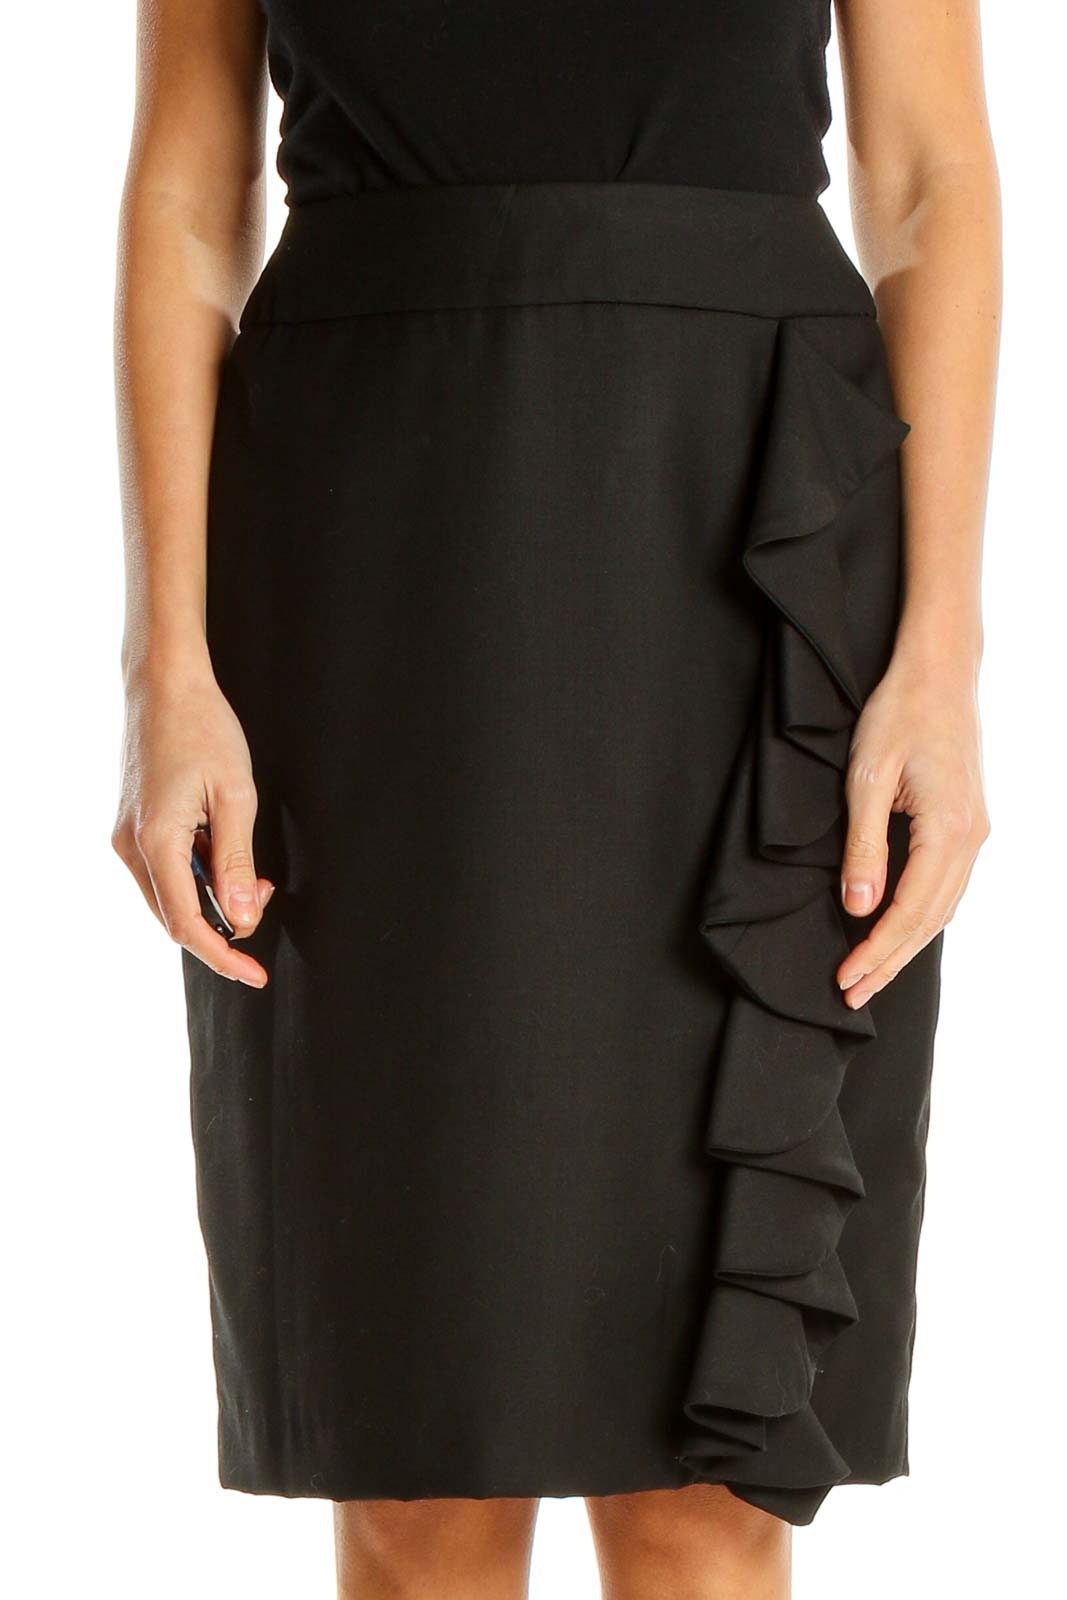 Black Textured Brunch Pencil Skirt with Ruffle Detail Front